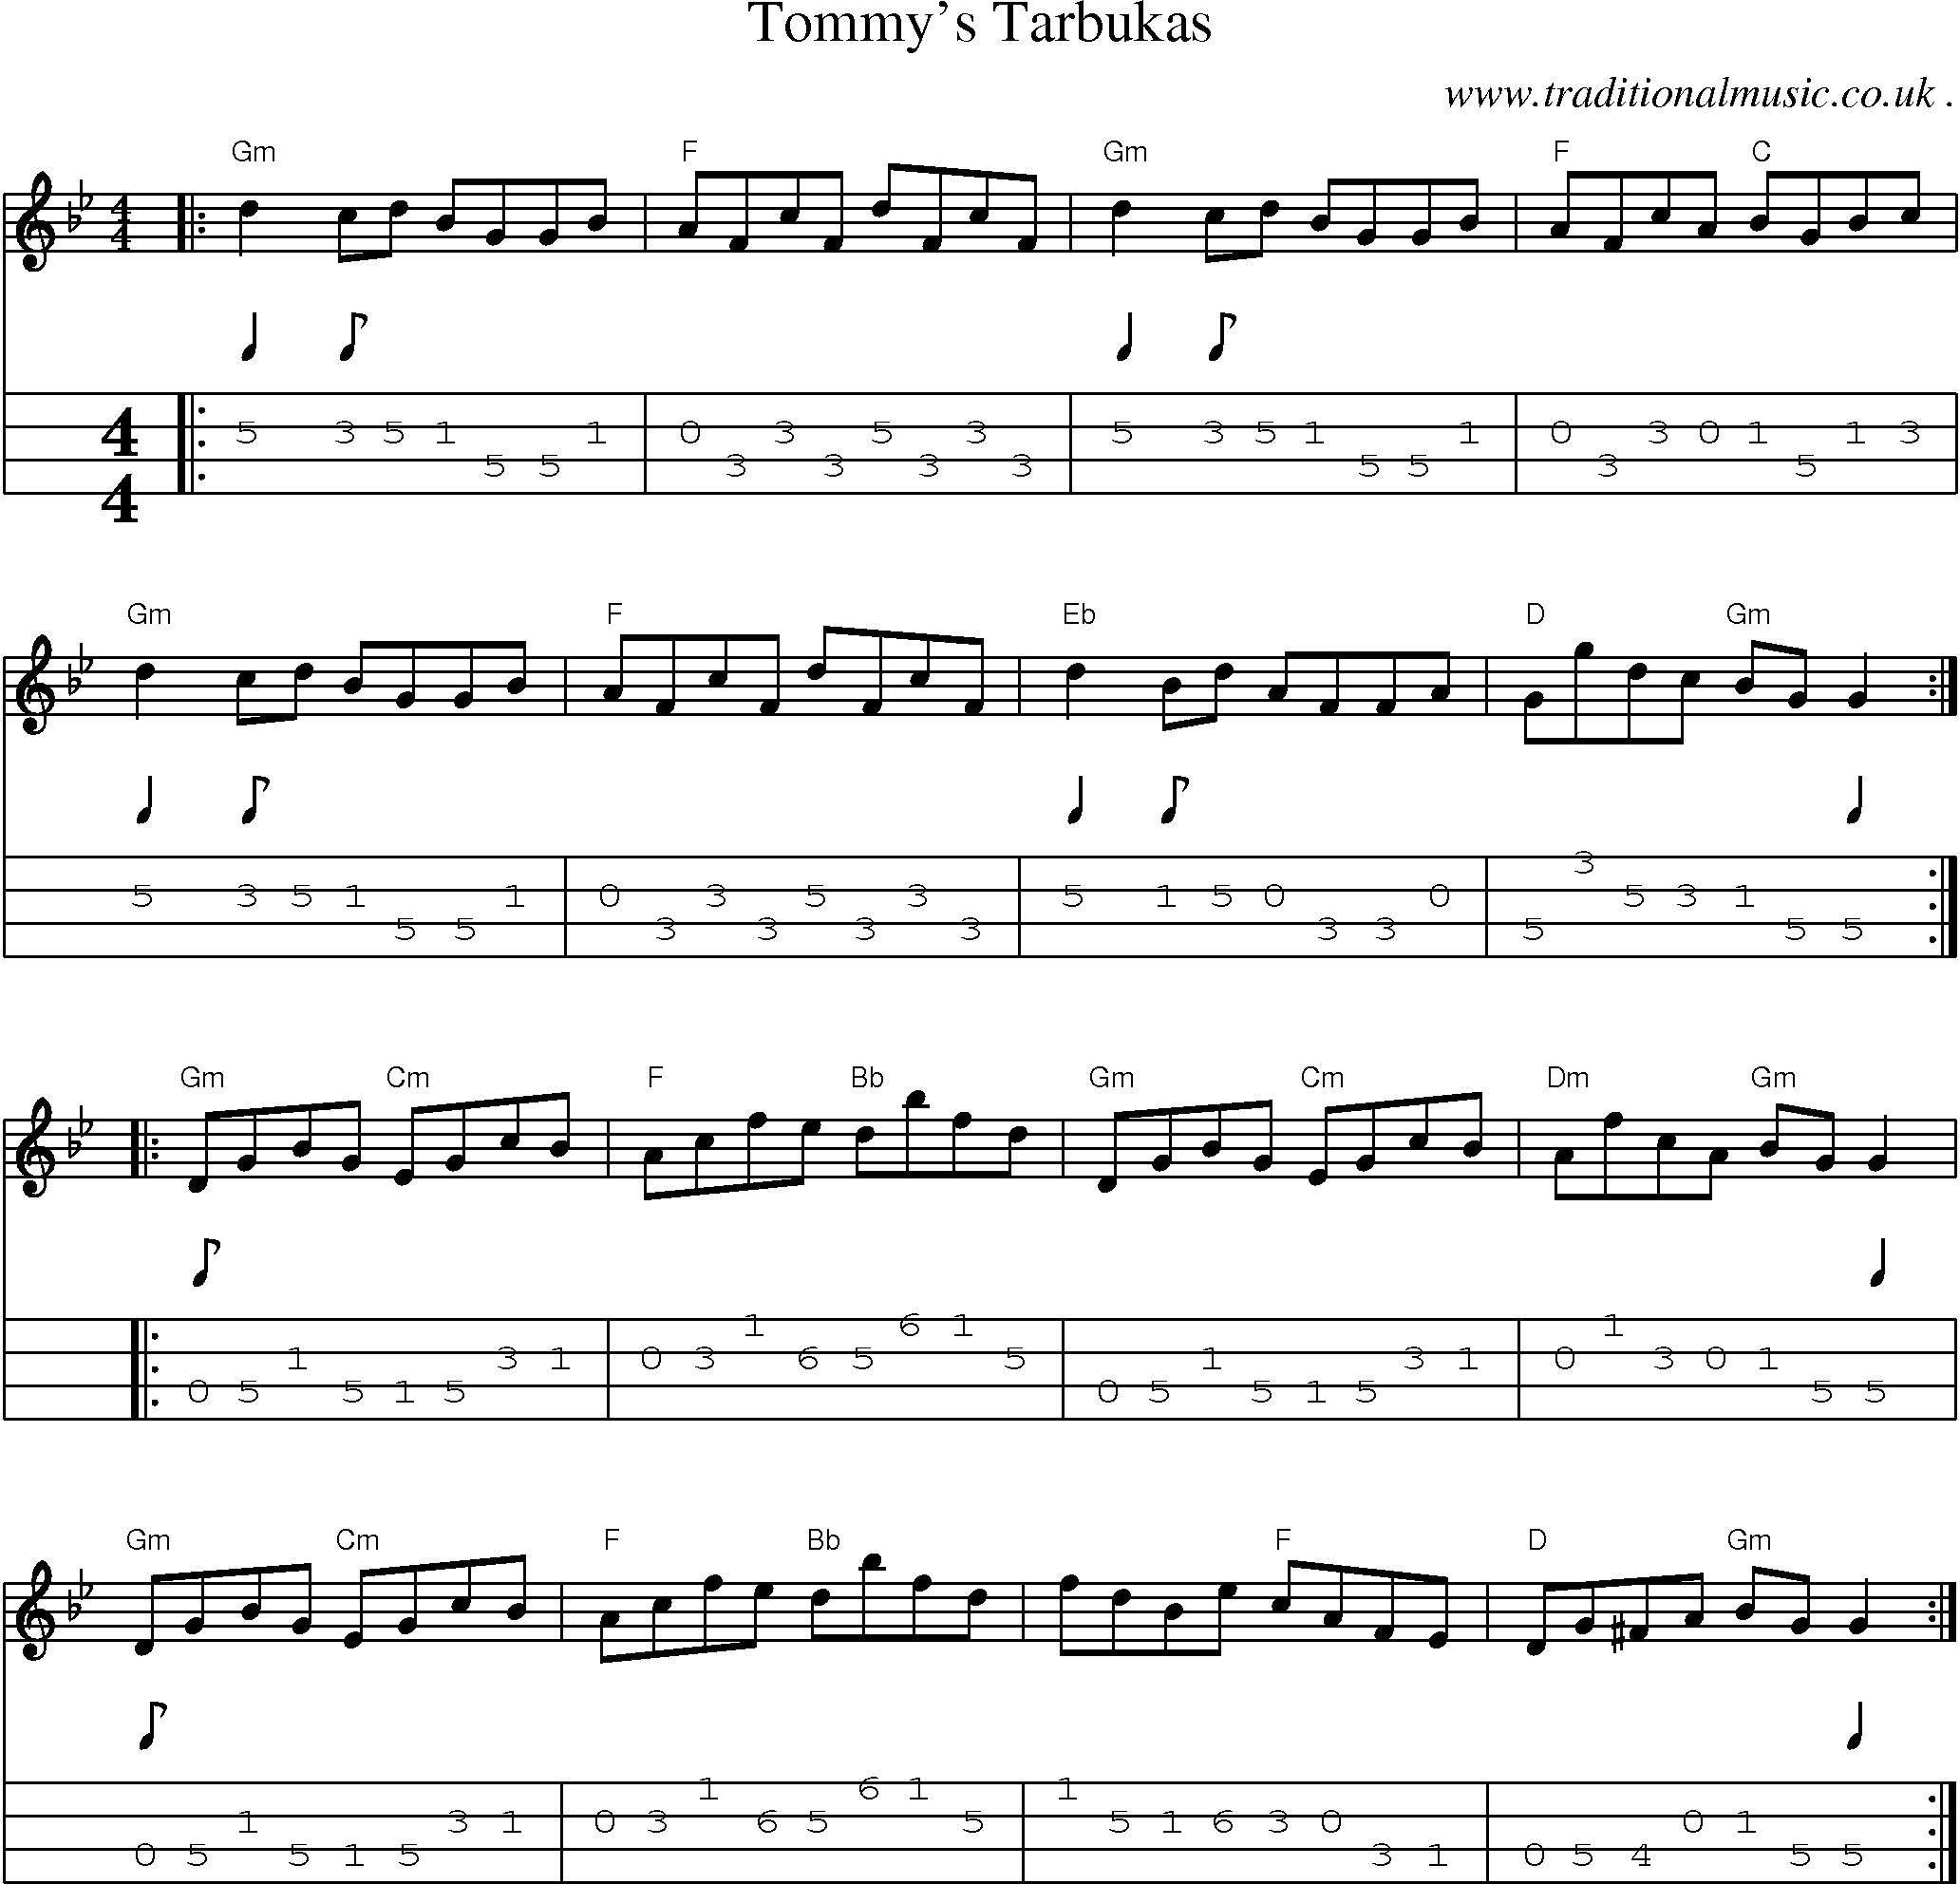 Music Score and Guitar Tabs for Tommys Tarbukas